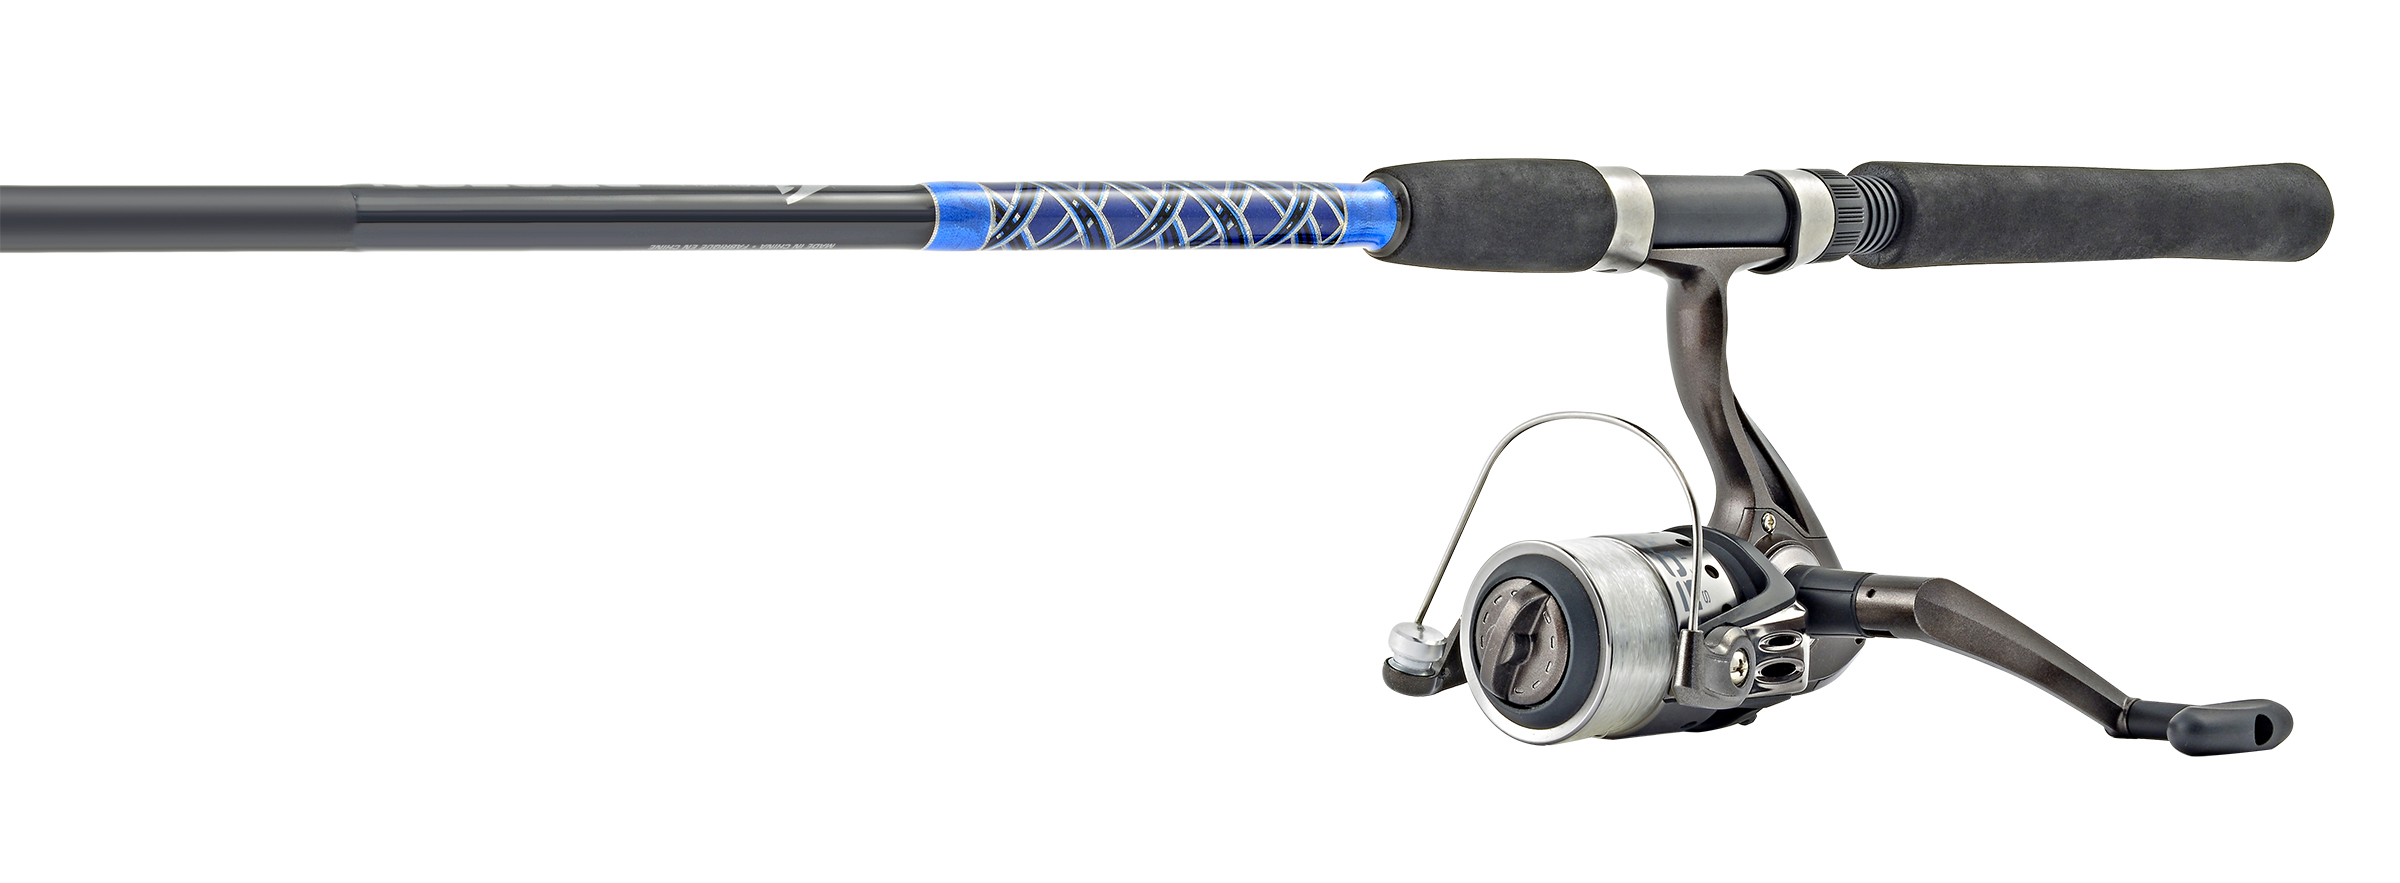 South Bend 6'6in Proton Spinning Fishing Rod and Reel Combo SBP230